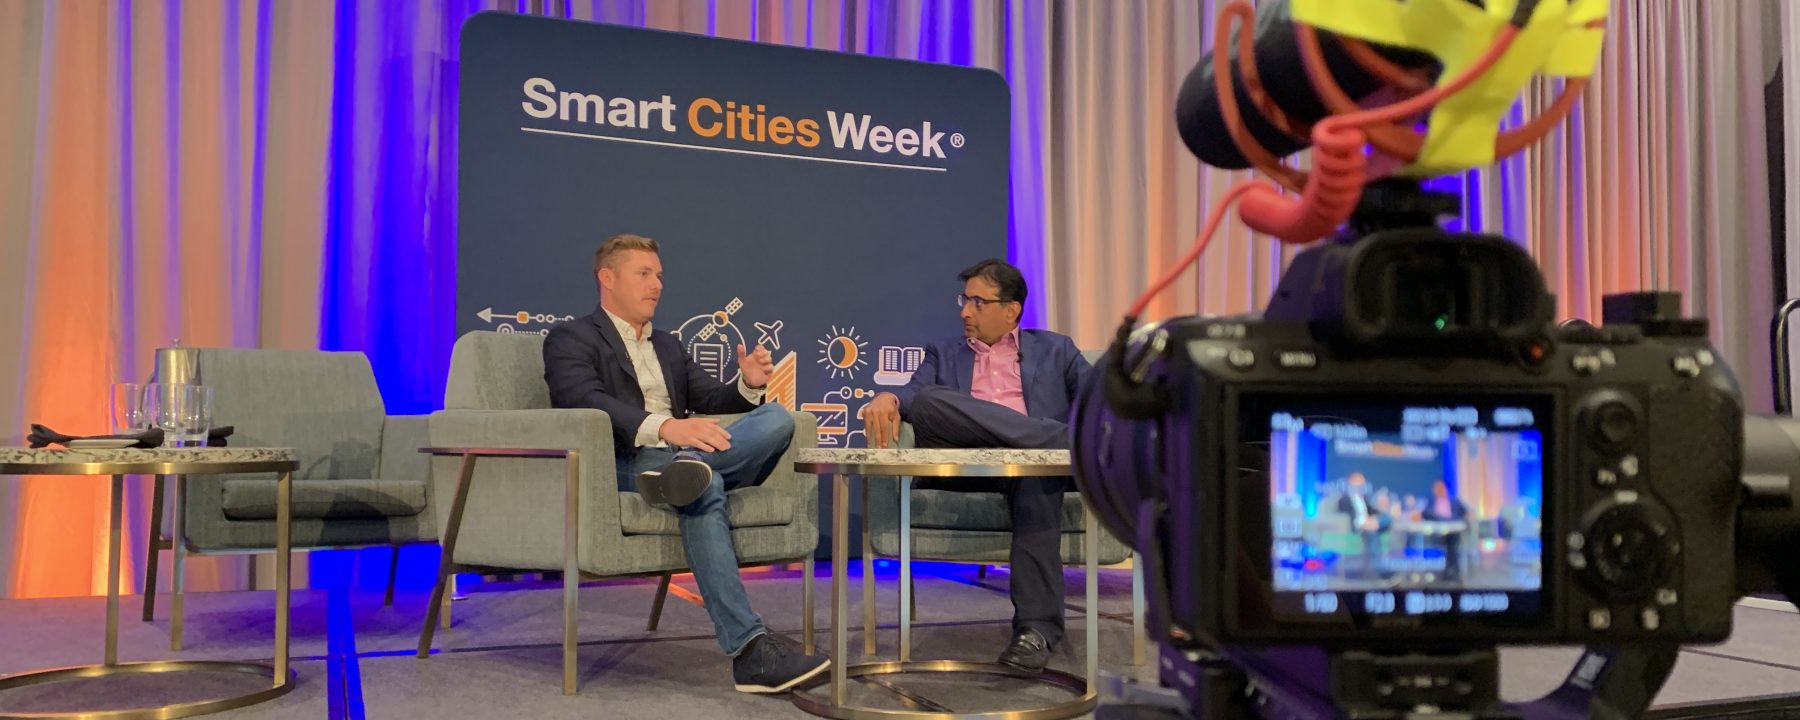 Going Green CEO Dylan Welch interviewing sustainable leaders at Smart Cities Week